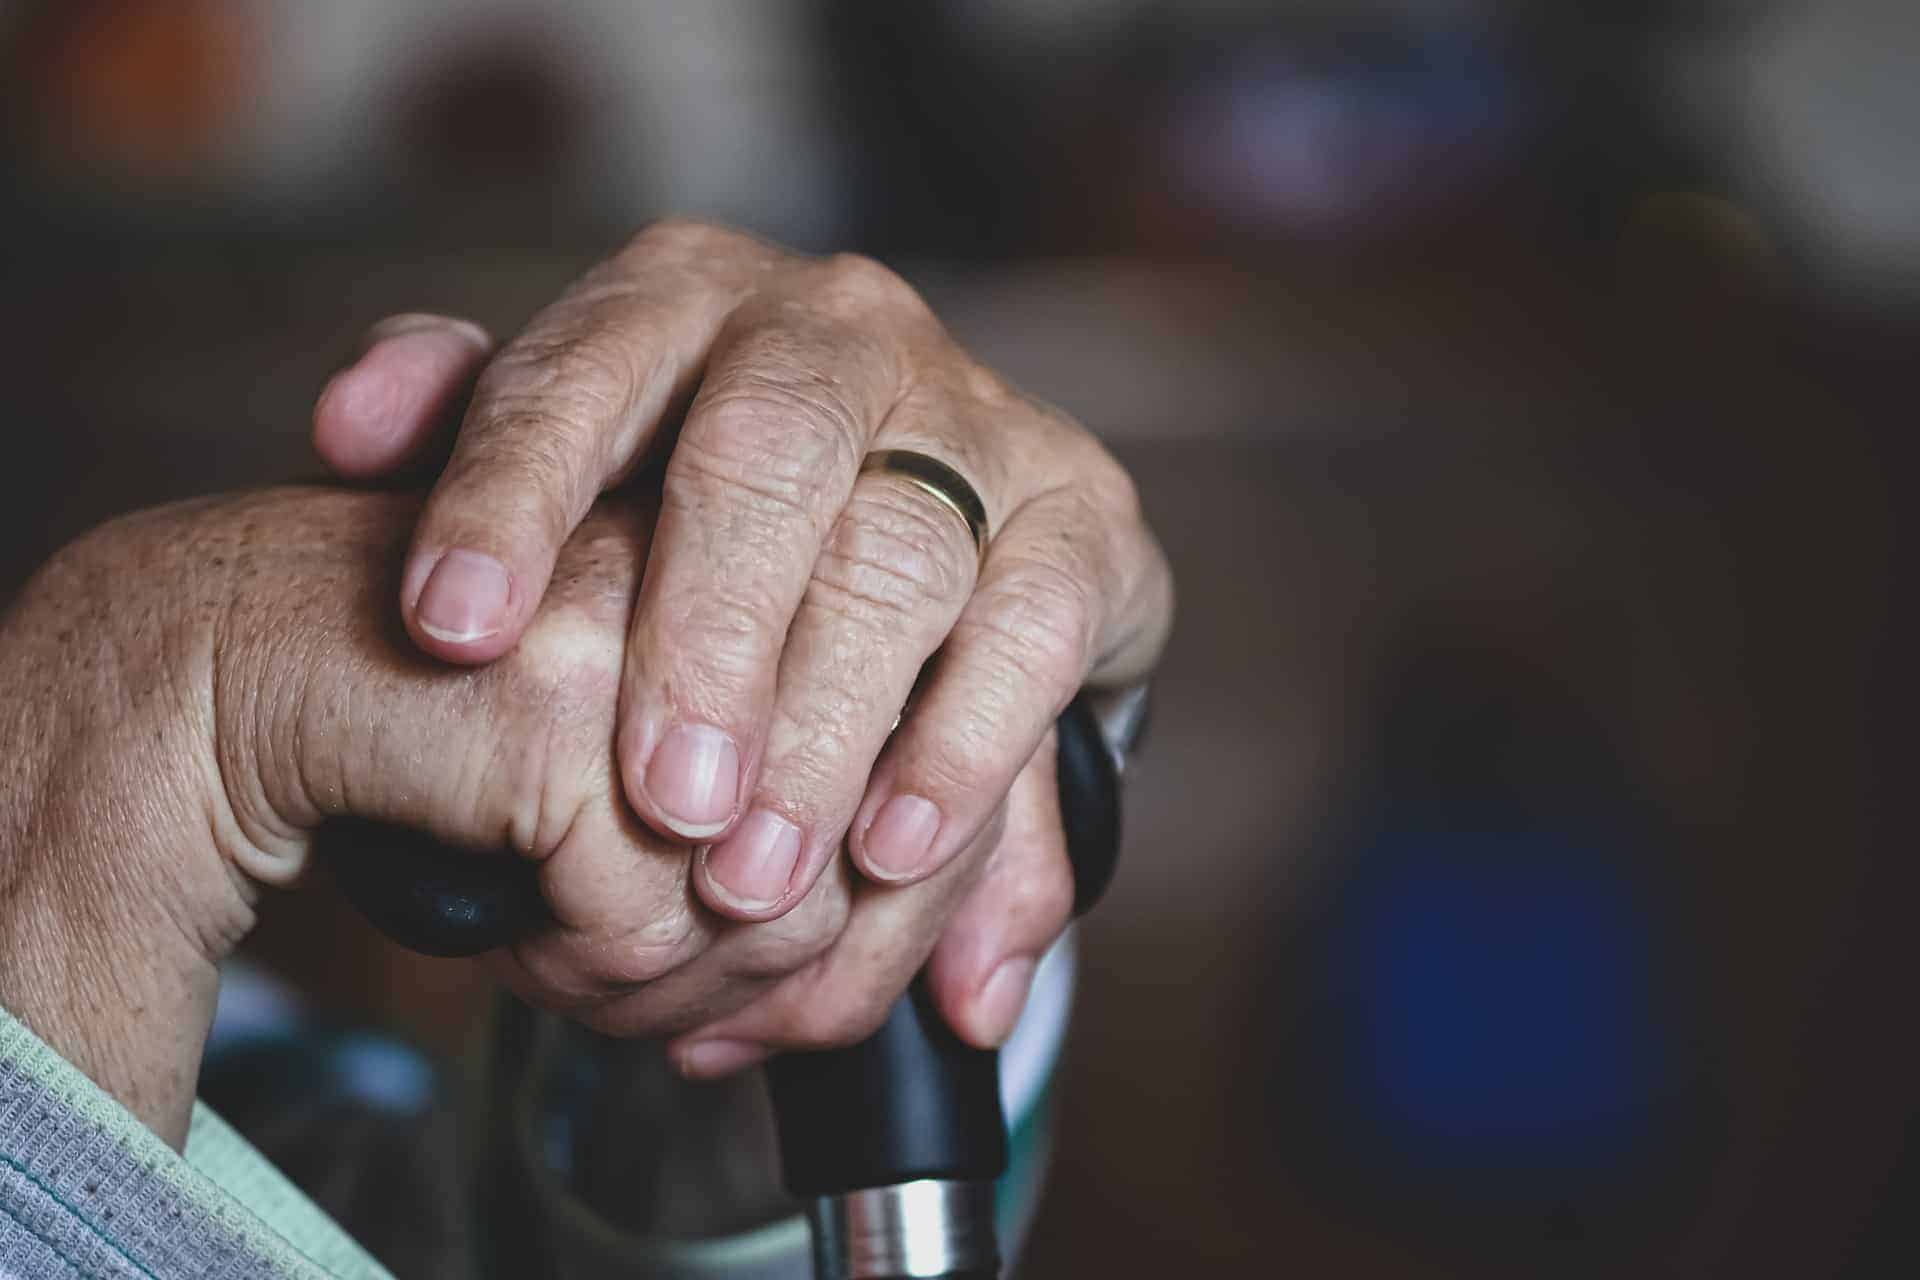 Gentle hands of elderly patients resting atop a walking cane, symbolizing the wisdom and journey of life.